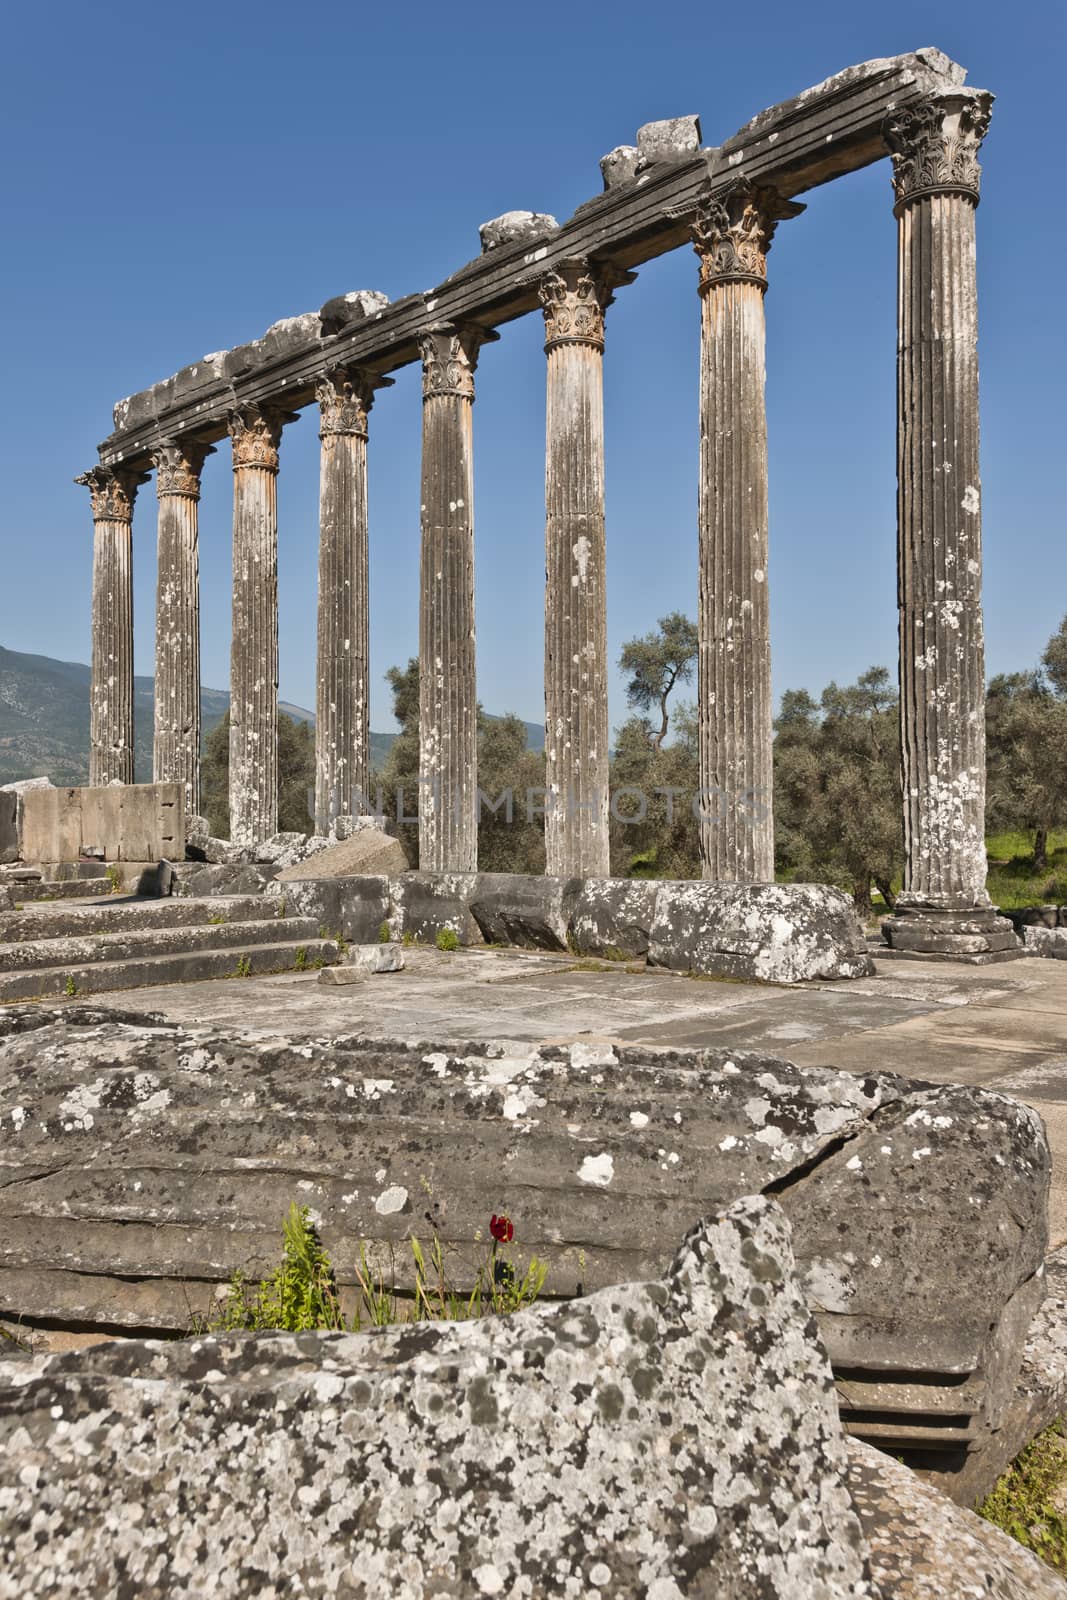 The Temple of Zeus at Euromos is to me the perfect ruined Greek temple.  Set in a forest of olive trees just east of the D525 highway between Selcuk (Ephesus) and Bodrum (25 km/16 miles SE of Lake Bafa, 13 km/8 miles NW of Milas), just south of the village of Selimiye (map), the Corinthian temple almost looks like a Hollywood set, except it's for real.  A shrine may have existed here from the 6th century BCE.  Believed to date from the time of Emperor Hadrian (117-138 CE), the Temple of Zeus Lepsynus and its precinct were excavated by Turkish archeologists starting in 1969. Look carefully and you'll see that some of the columns are unfluted, meaning perhaps that the temple was never finished.  Located about a mile south of the village of Selimiye, the temple area has no services, although there may be a villager selling cold drinks.  Stop for a half-hour's look if you're driving south from ?zmir or Ephesus headed for Milas, Bodrum or Marmaris.  This is actually a much larger archeological site than just the temple. The hillside to the east is littered with ruins, and if you spend an hour hiking around you can find a theater, an agora and massive defensive walls.